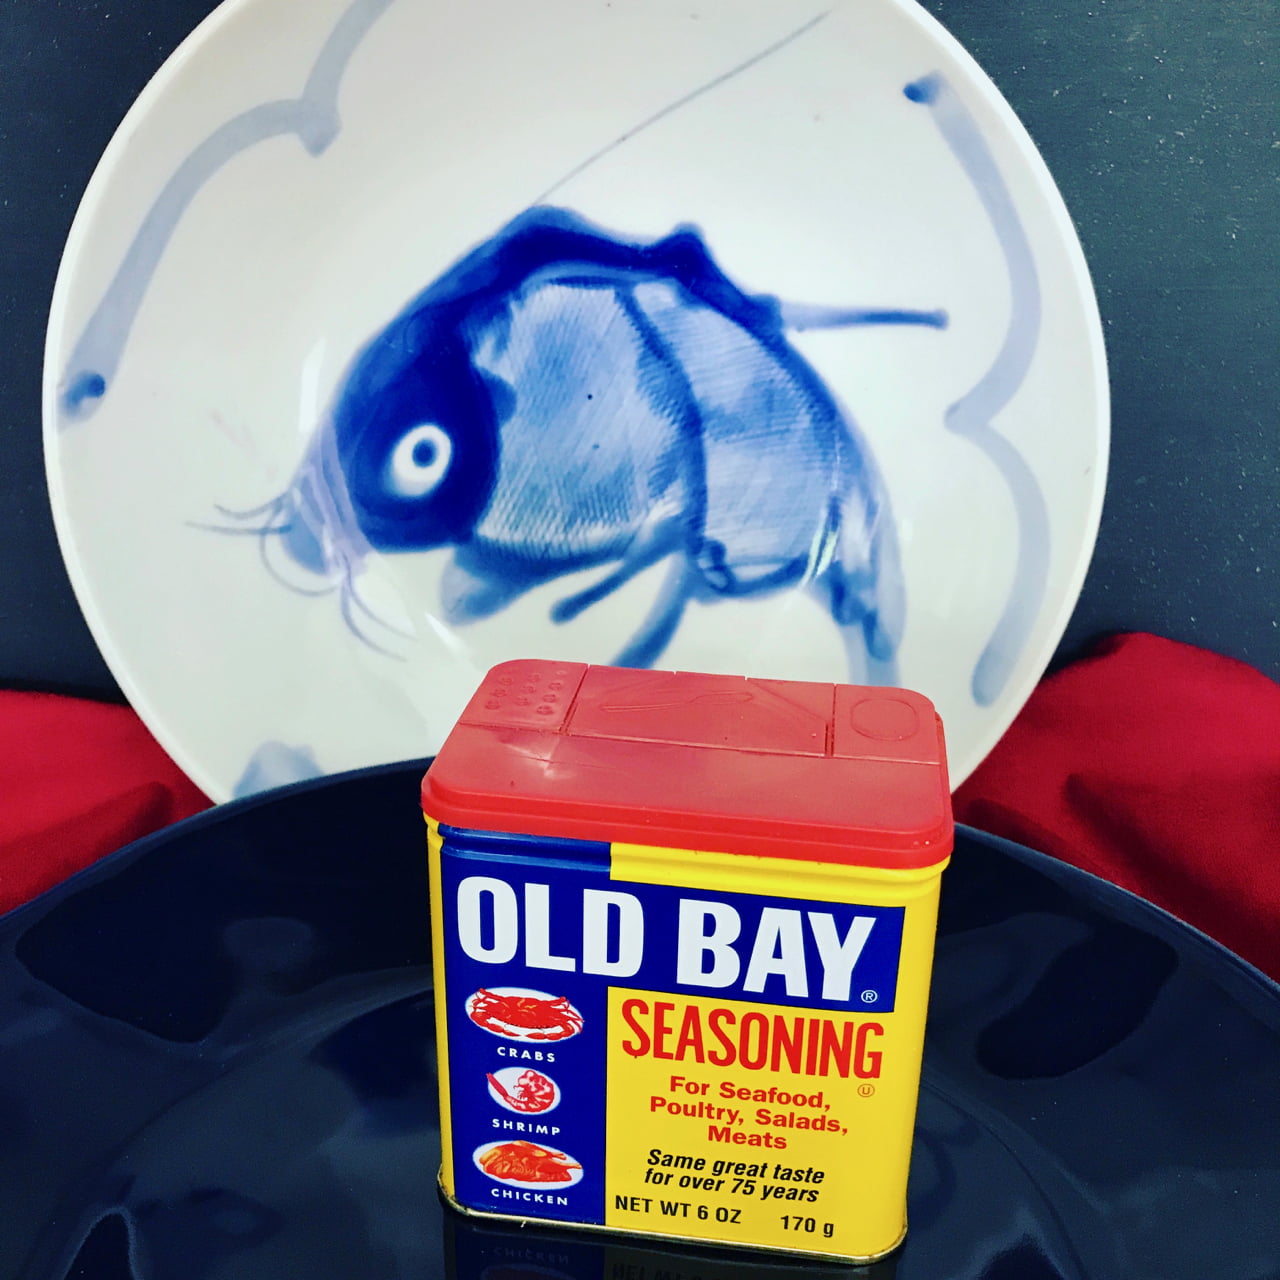 Old Bay seasoning - it's a Maryland thing!